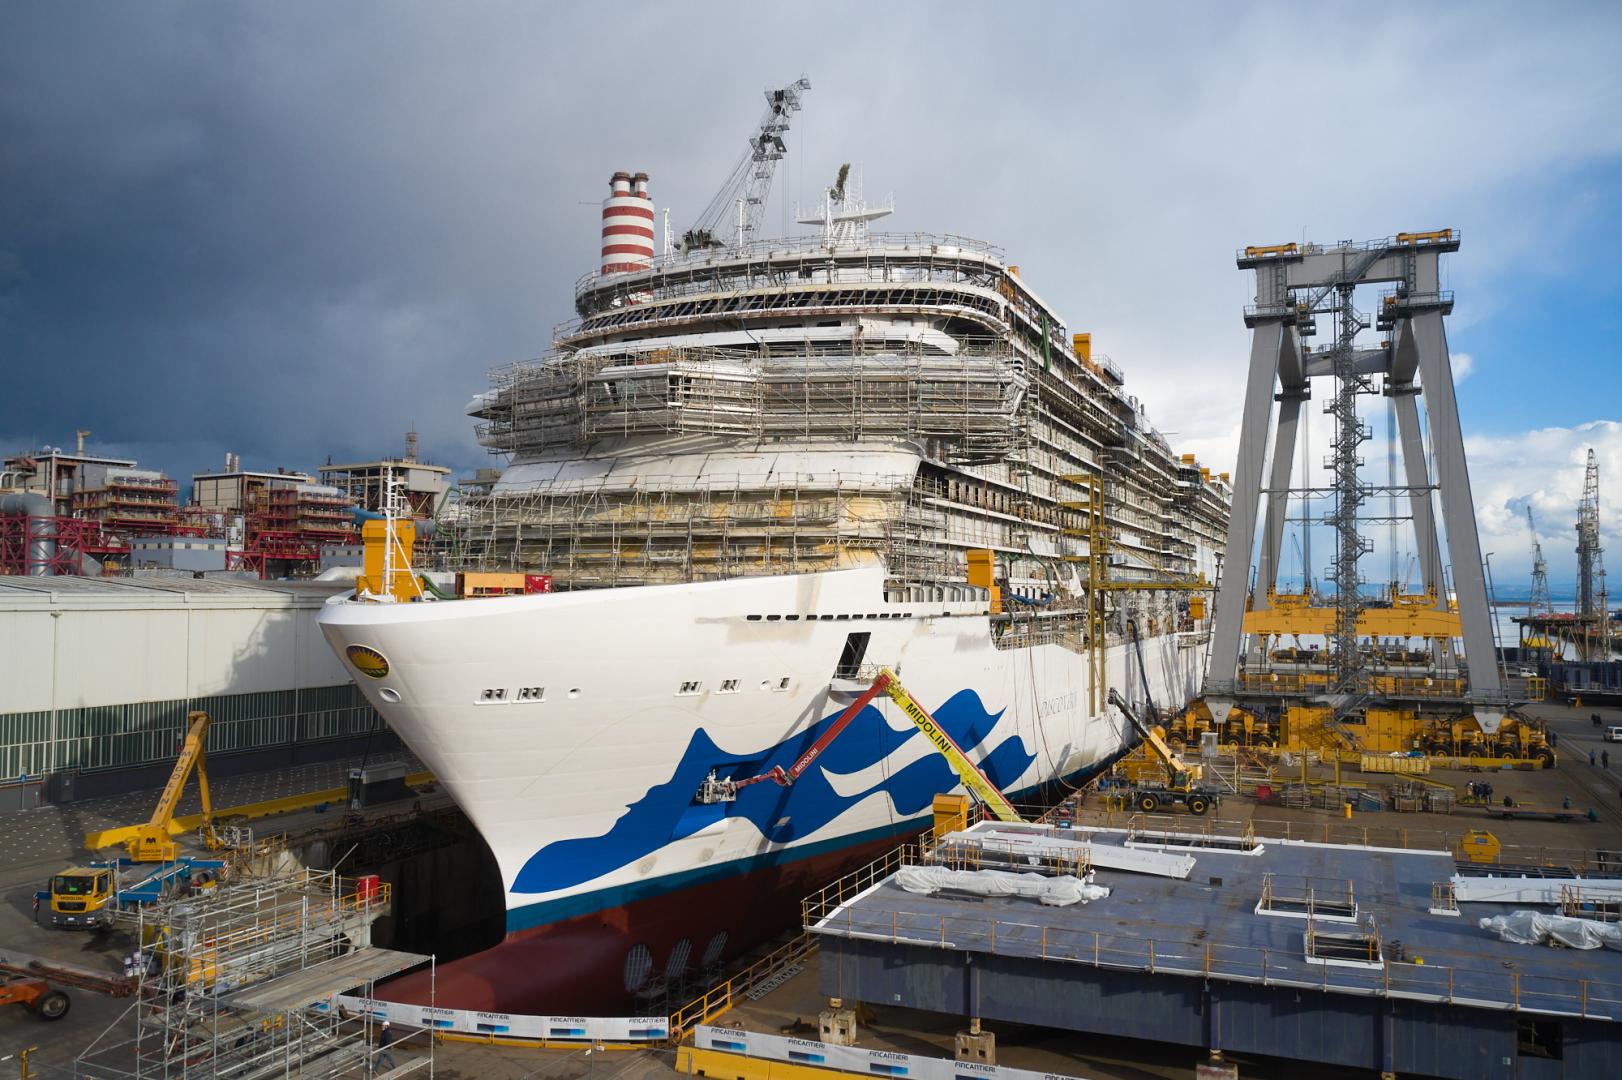 Fincantieri: Discovery Princess Floats out in Monfalcone